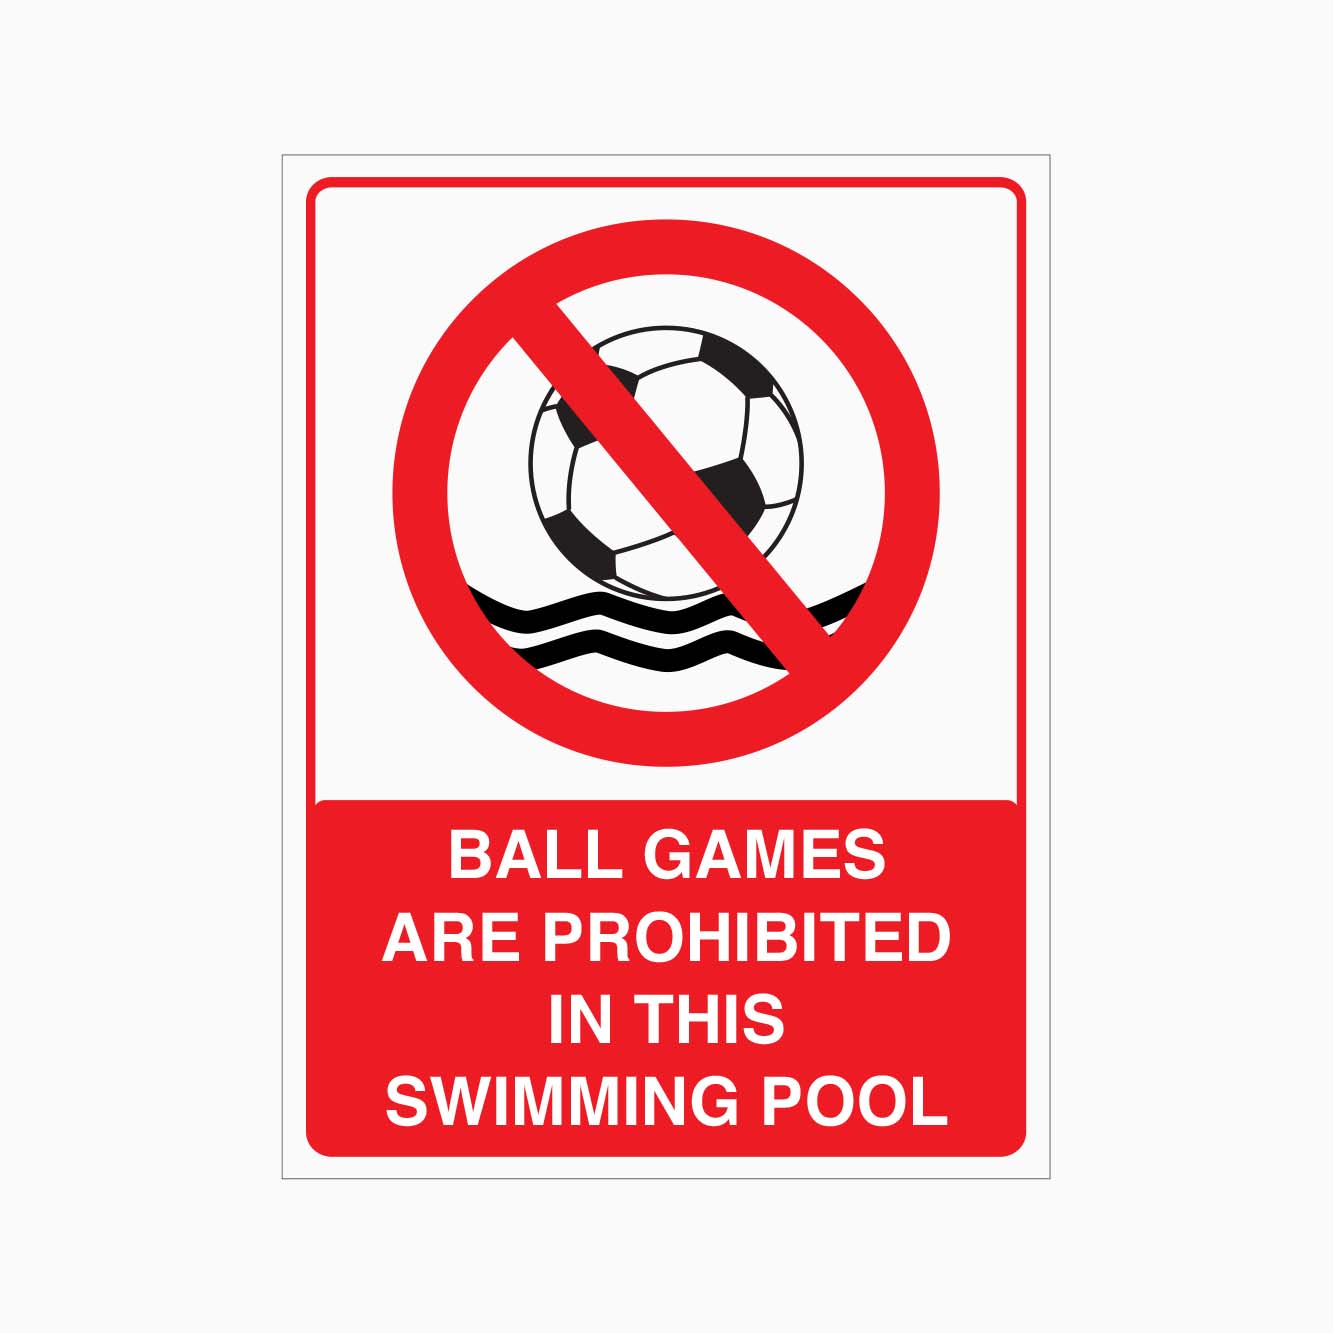 BALL GAMES ARE PROHIBITED IN THIS SWIMMING POOL SIGN - GET SIGNS